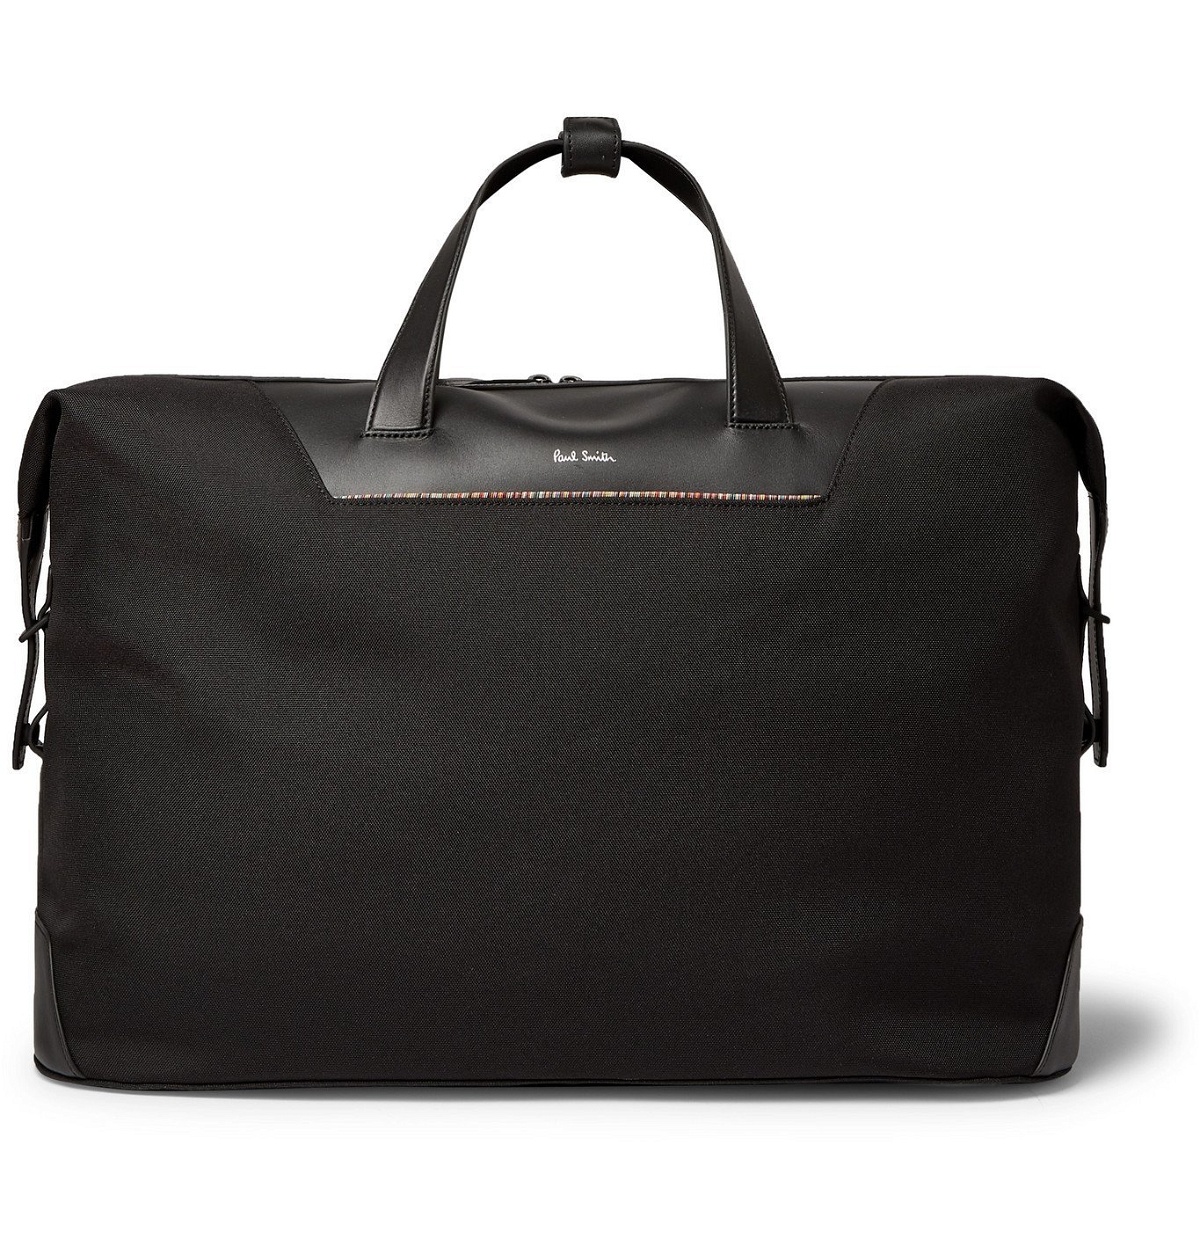 Paul Smith - Leather-Trimmed Nylon Holdall - Black Paul Smith